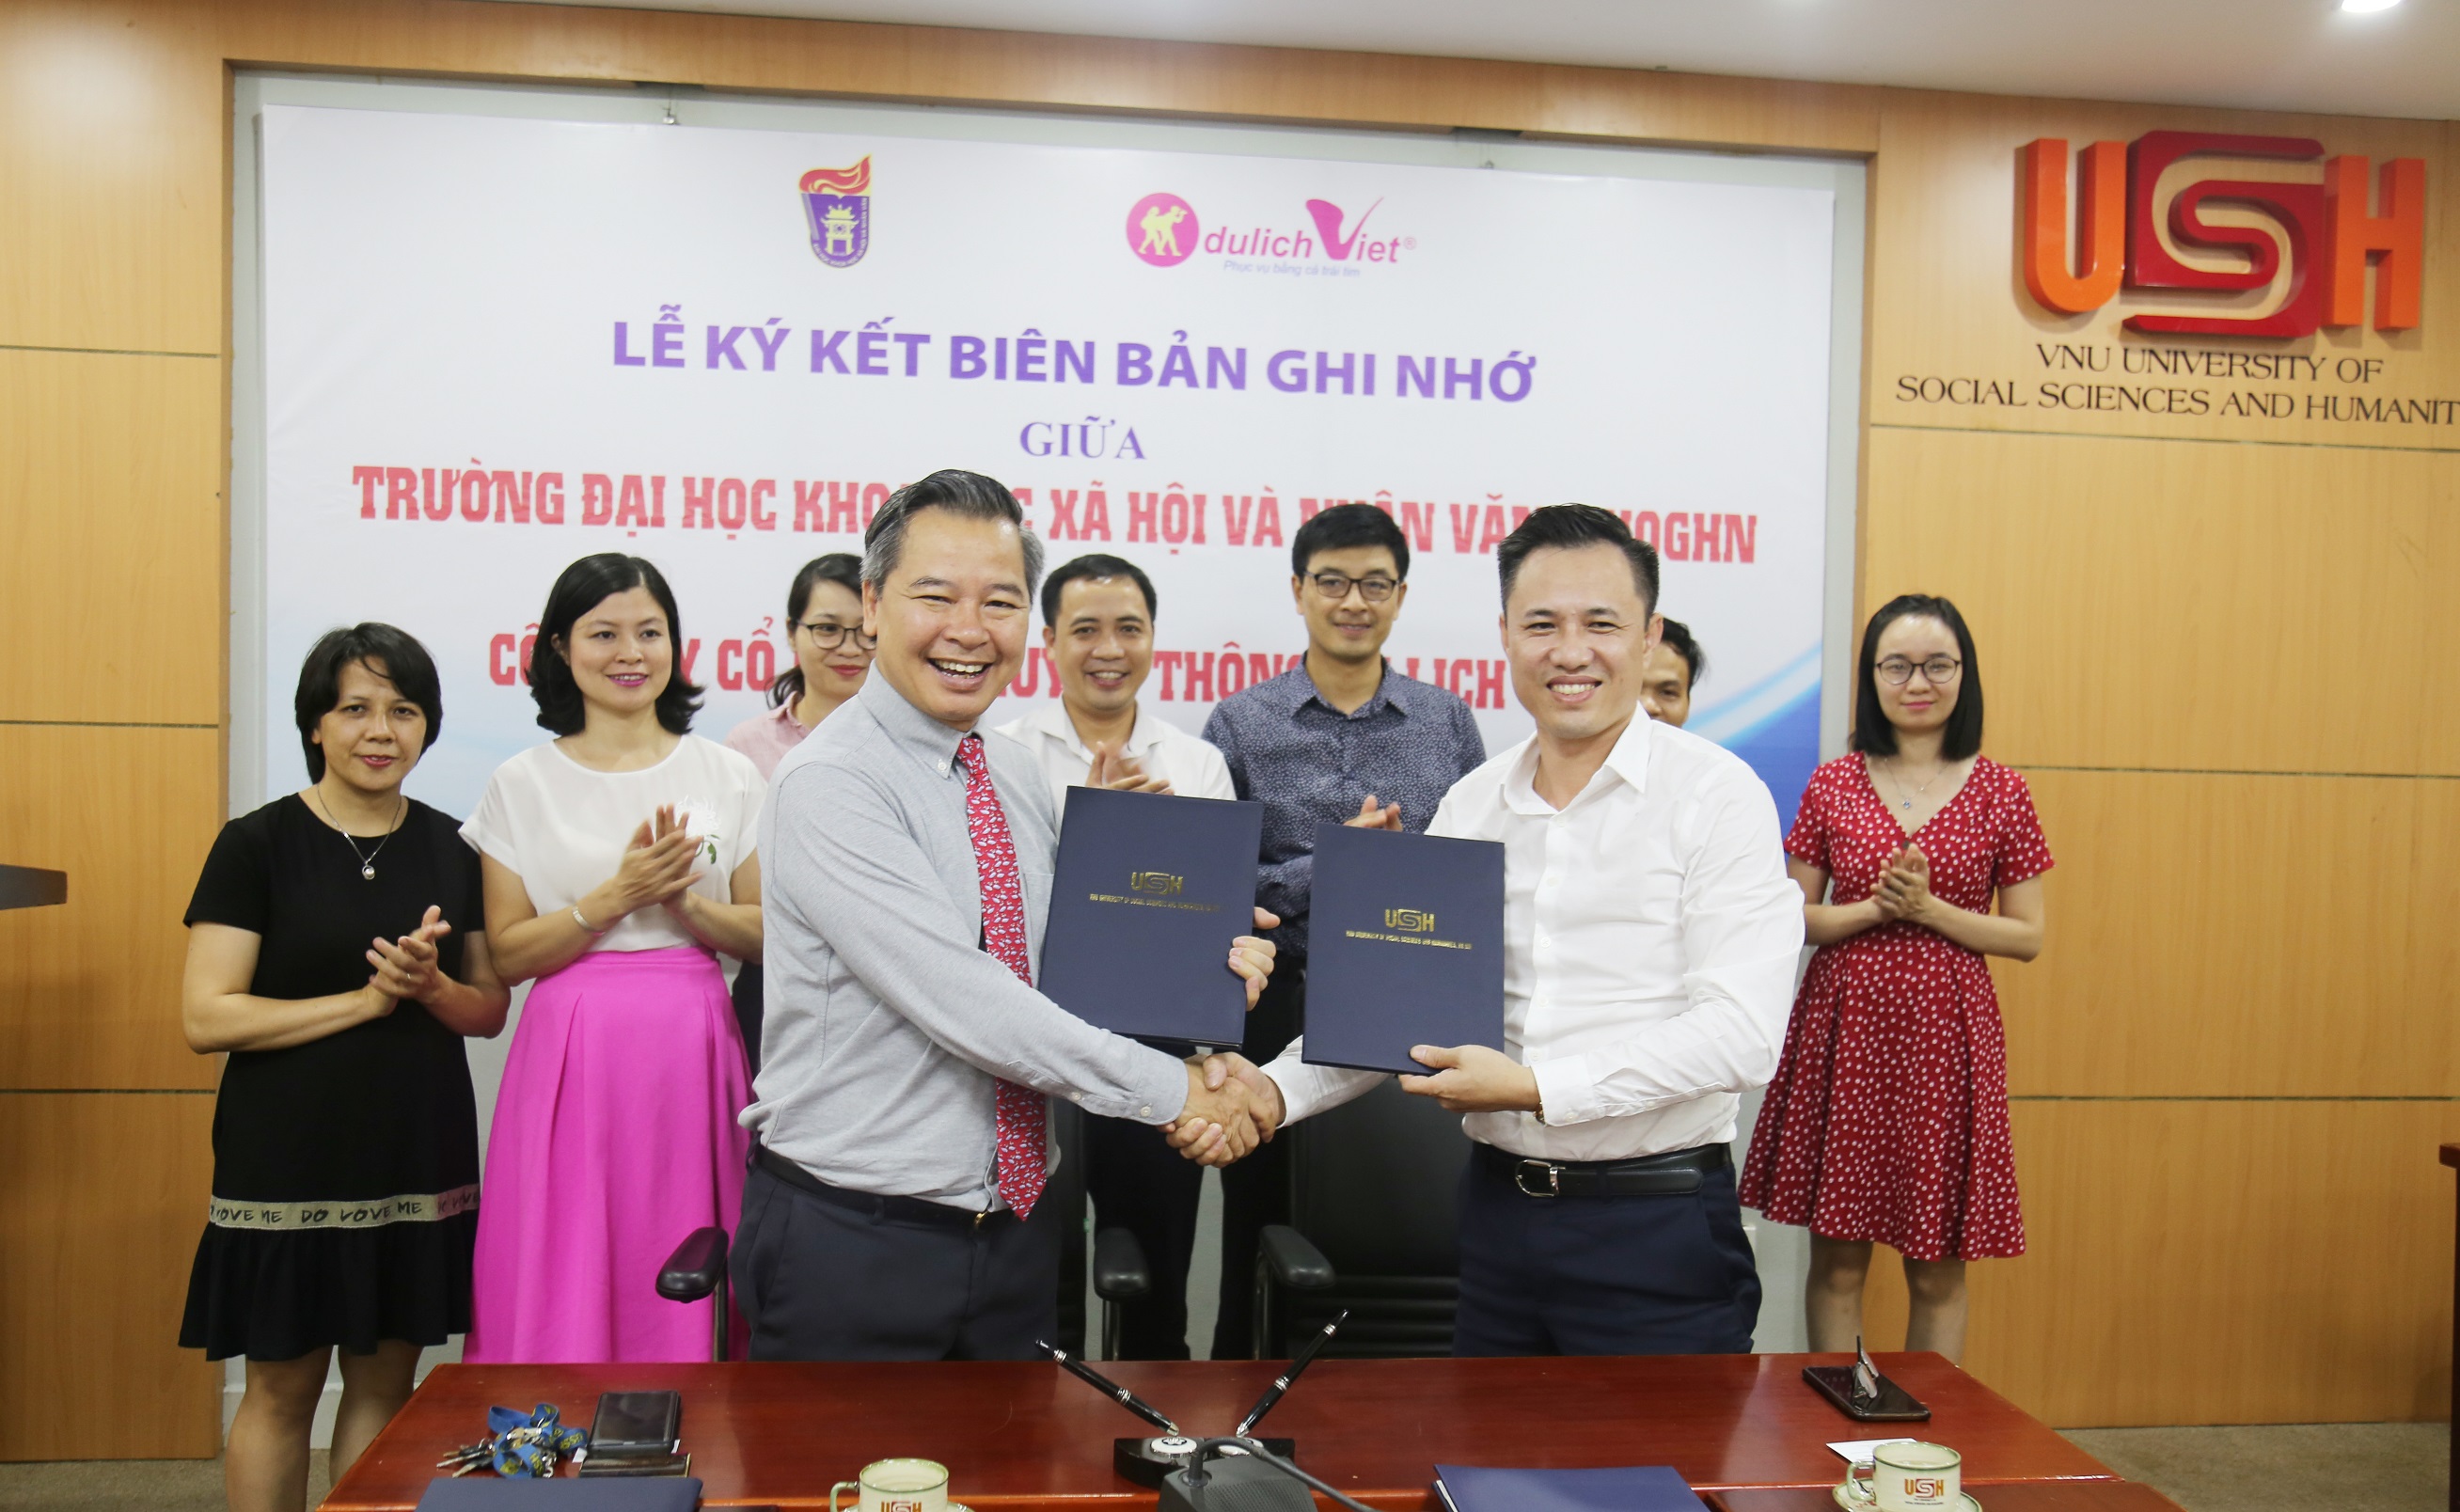 Signing official MOU with Vietmedia travel corporation